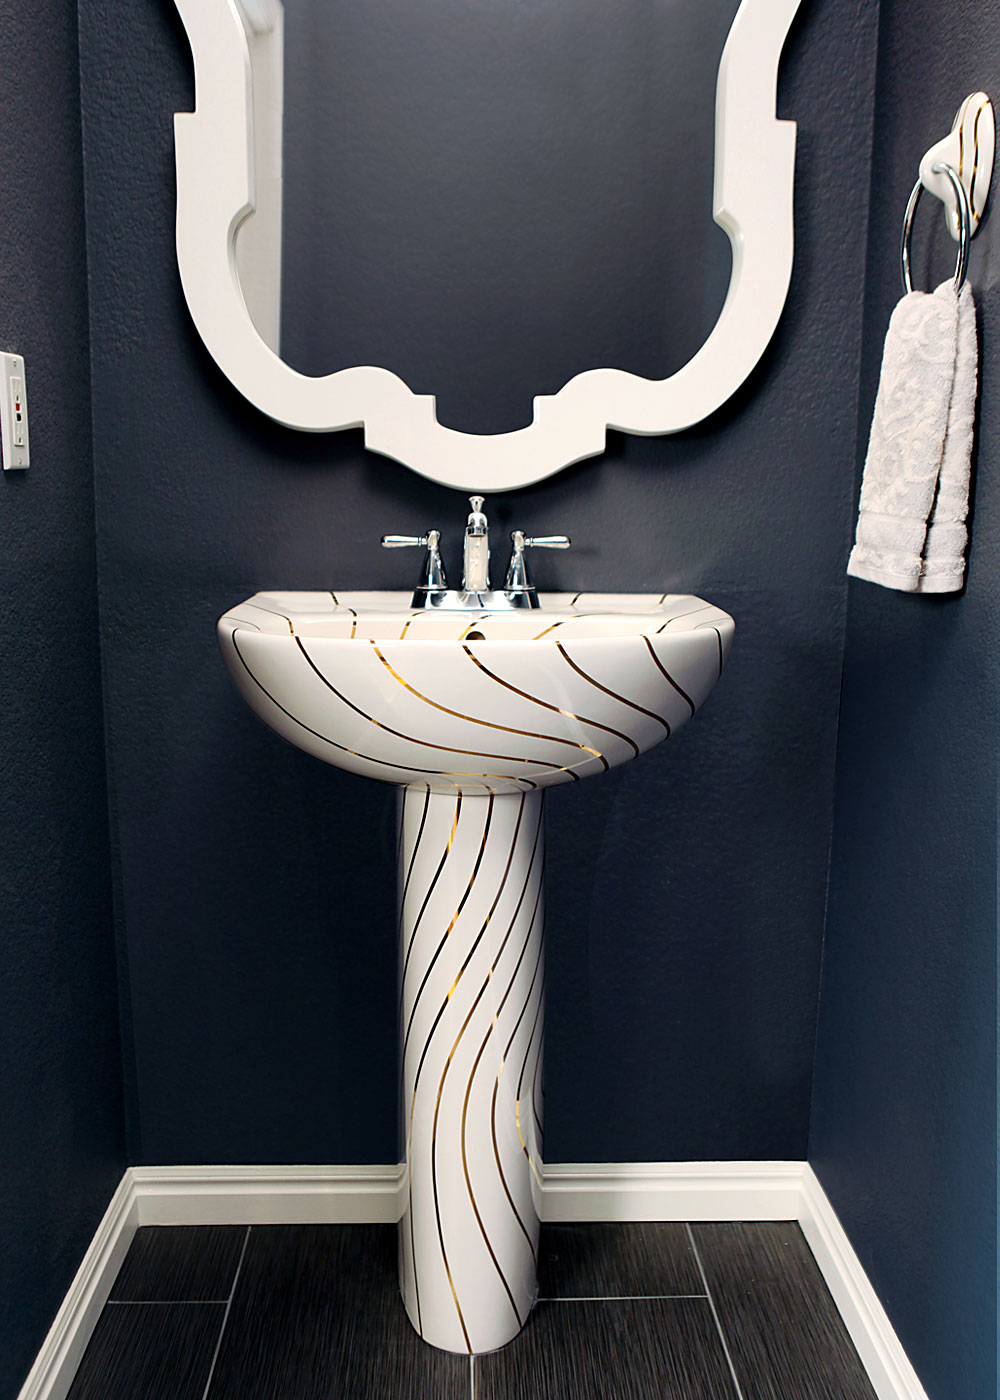 Create a Modern Bathroom Interior with the Gold Swirling Lines Painted Sink & Toilet